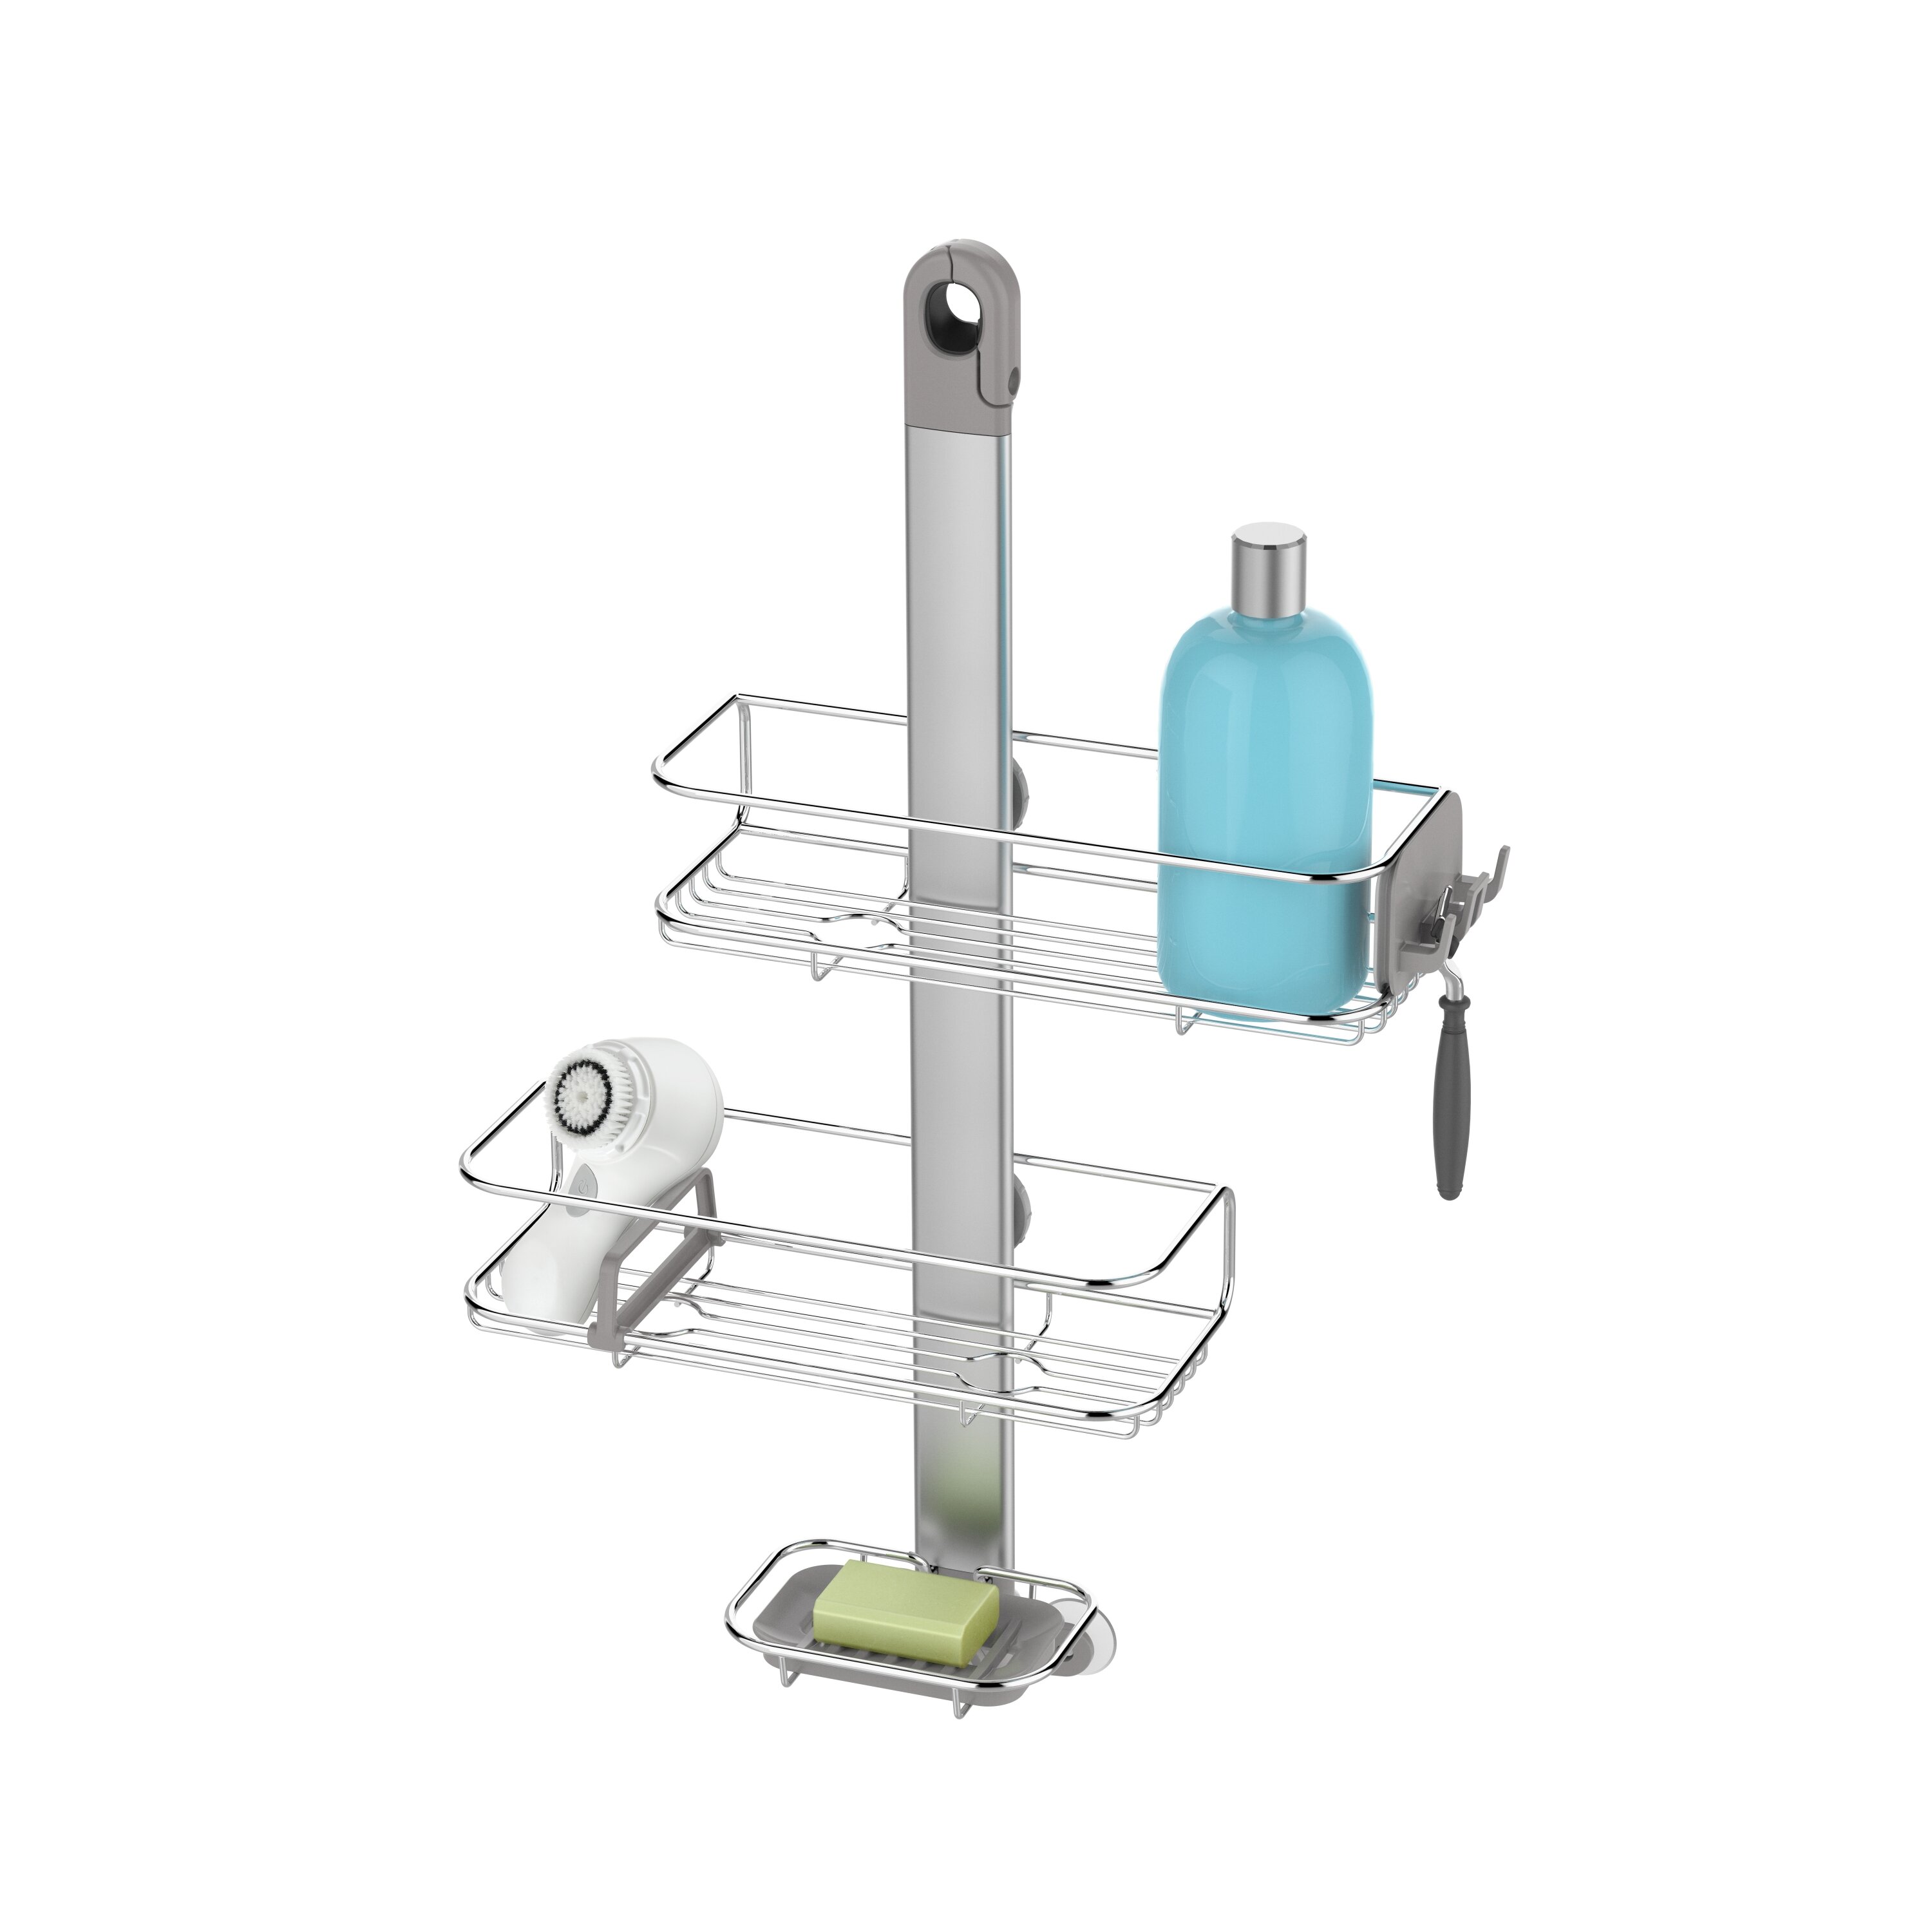 simplehuman Adjustable Shower Caddy in Stainless Steel & Anodized Simplehuman Adjustable Shower Caddy Stainless Steel And Anodized Aluminum